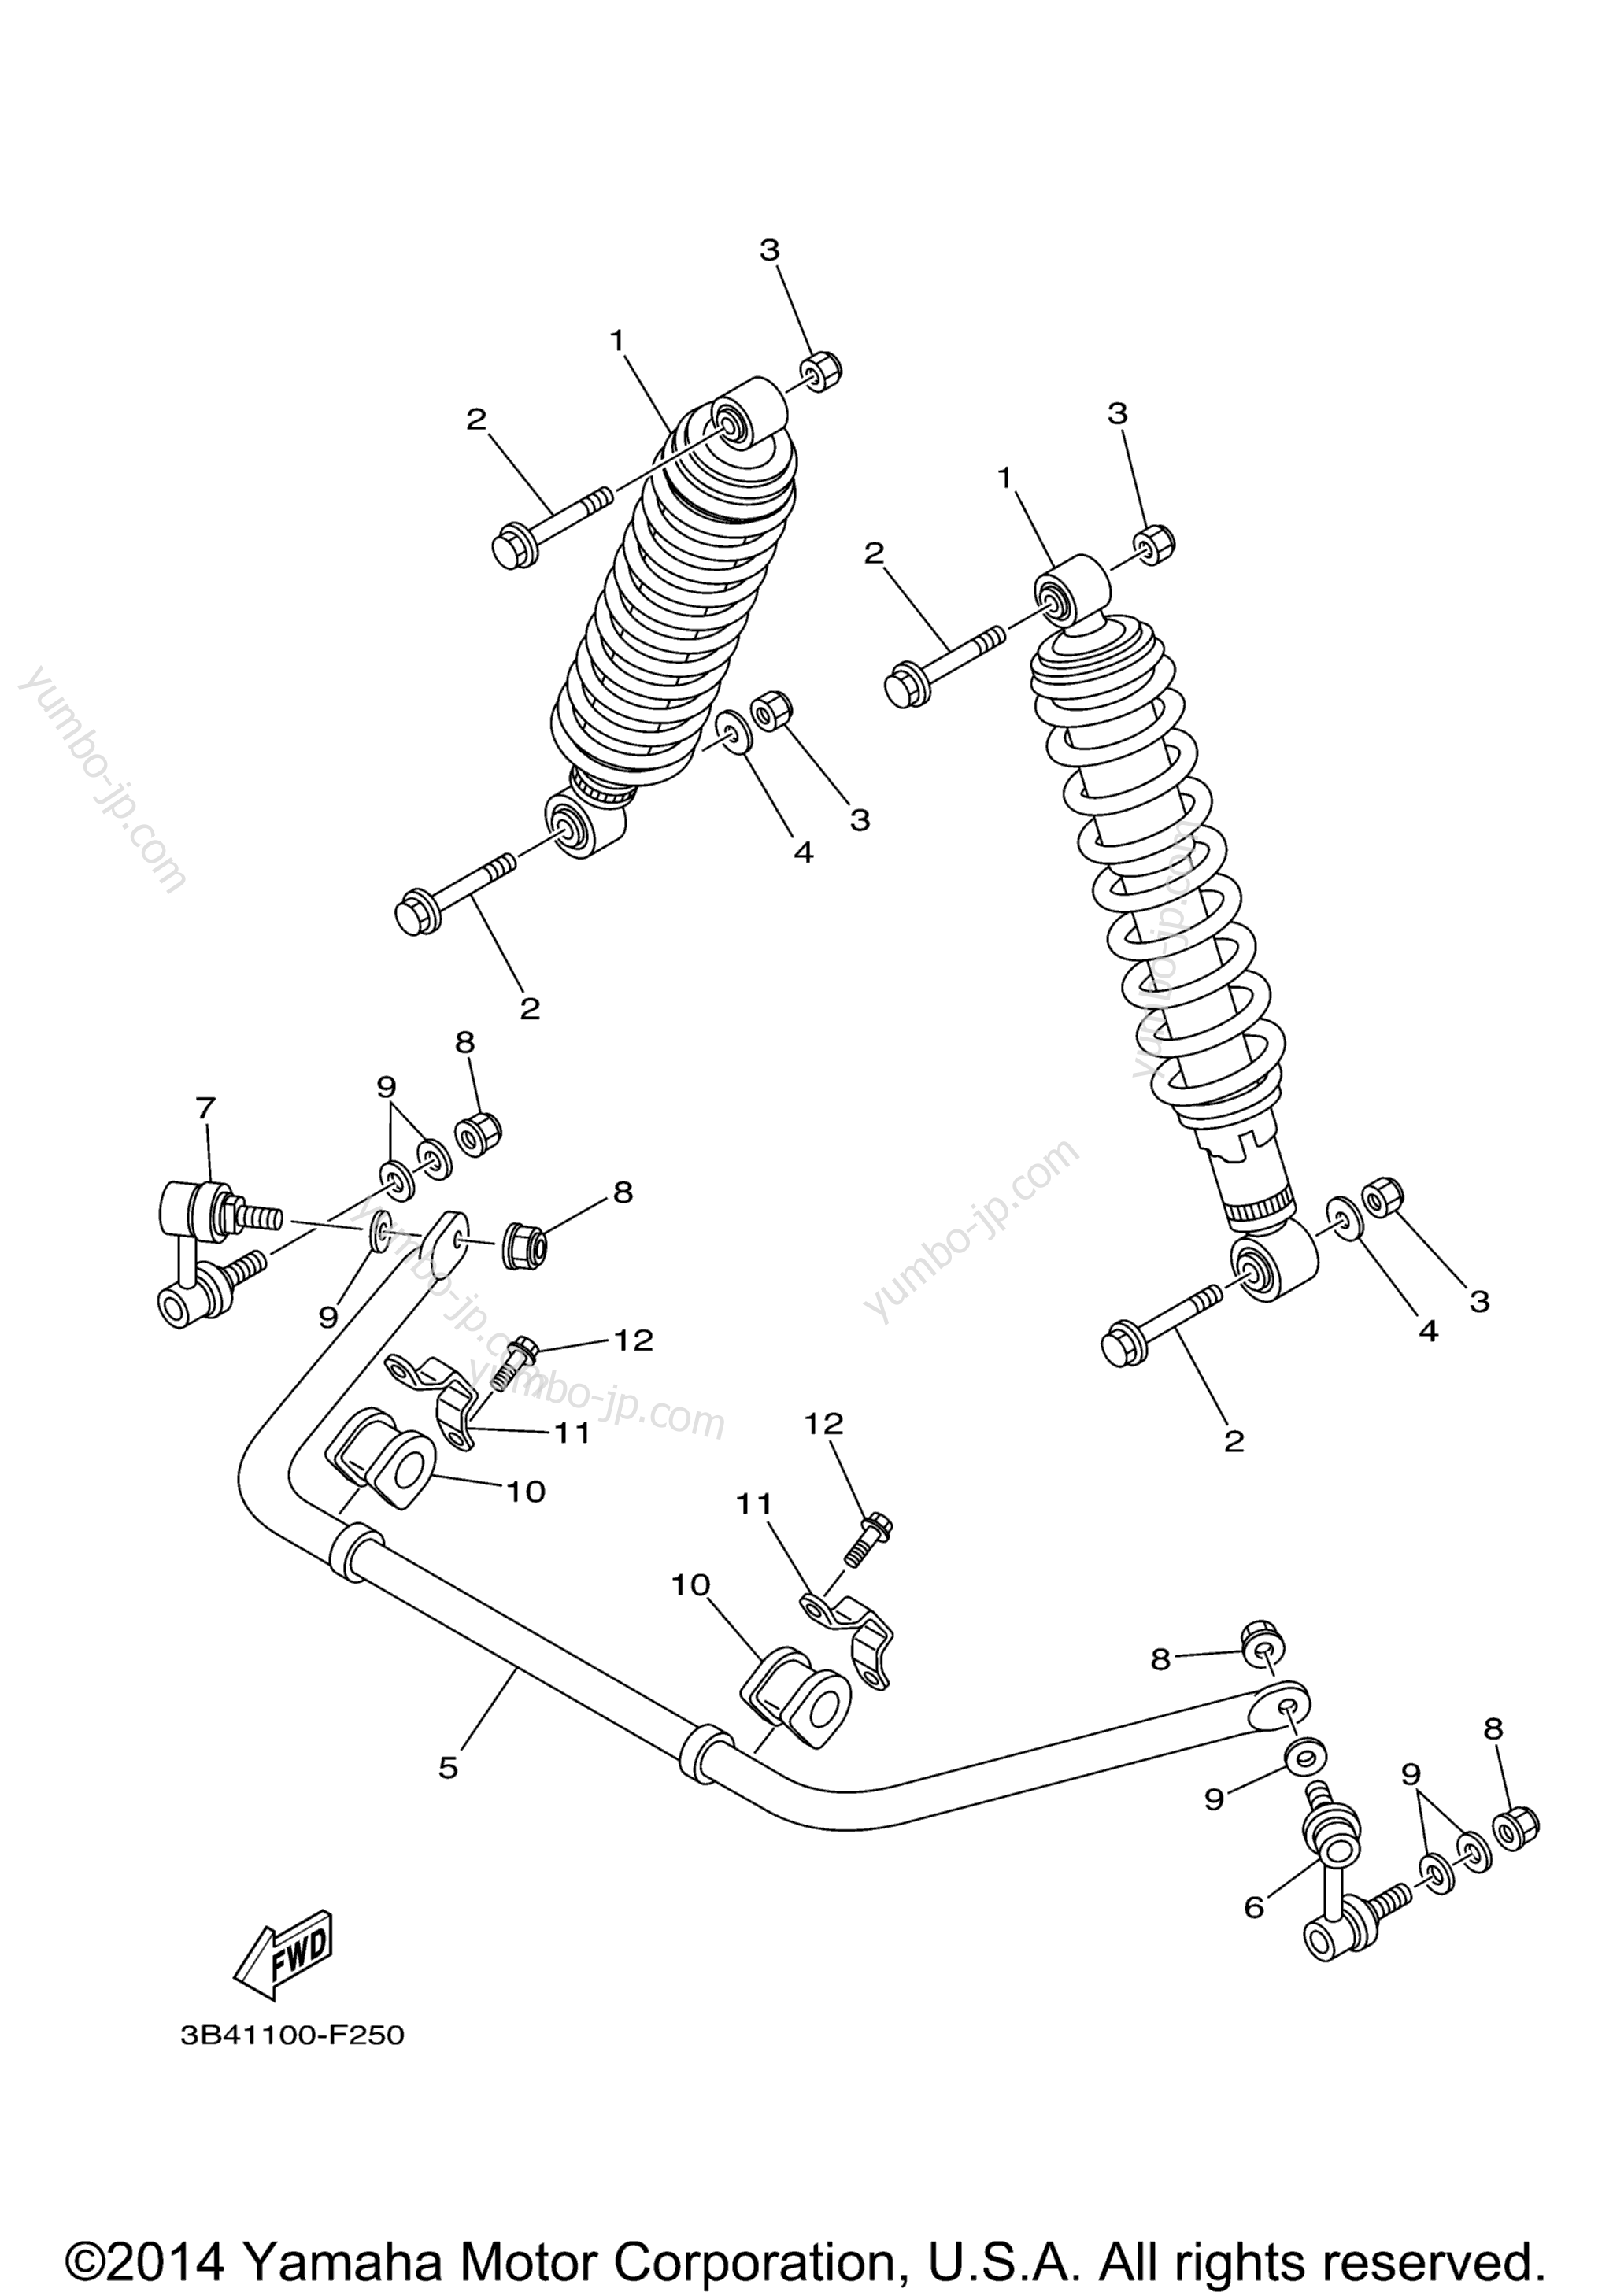 Rear Suspension for ATVs YAMAHA GRIZZLY 550 FI EPS 4WD (YFM5FGPZL) 2010 year